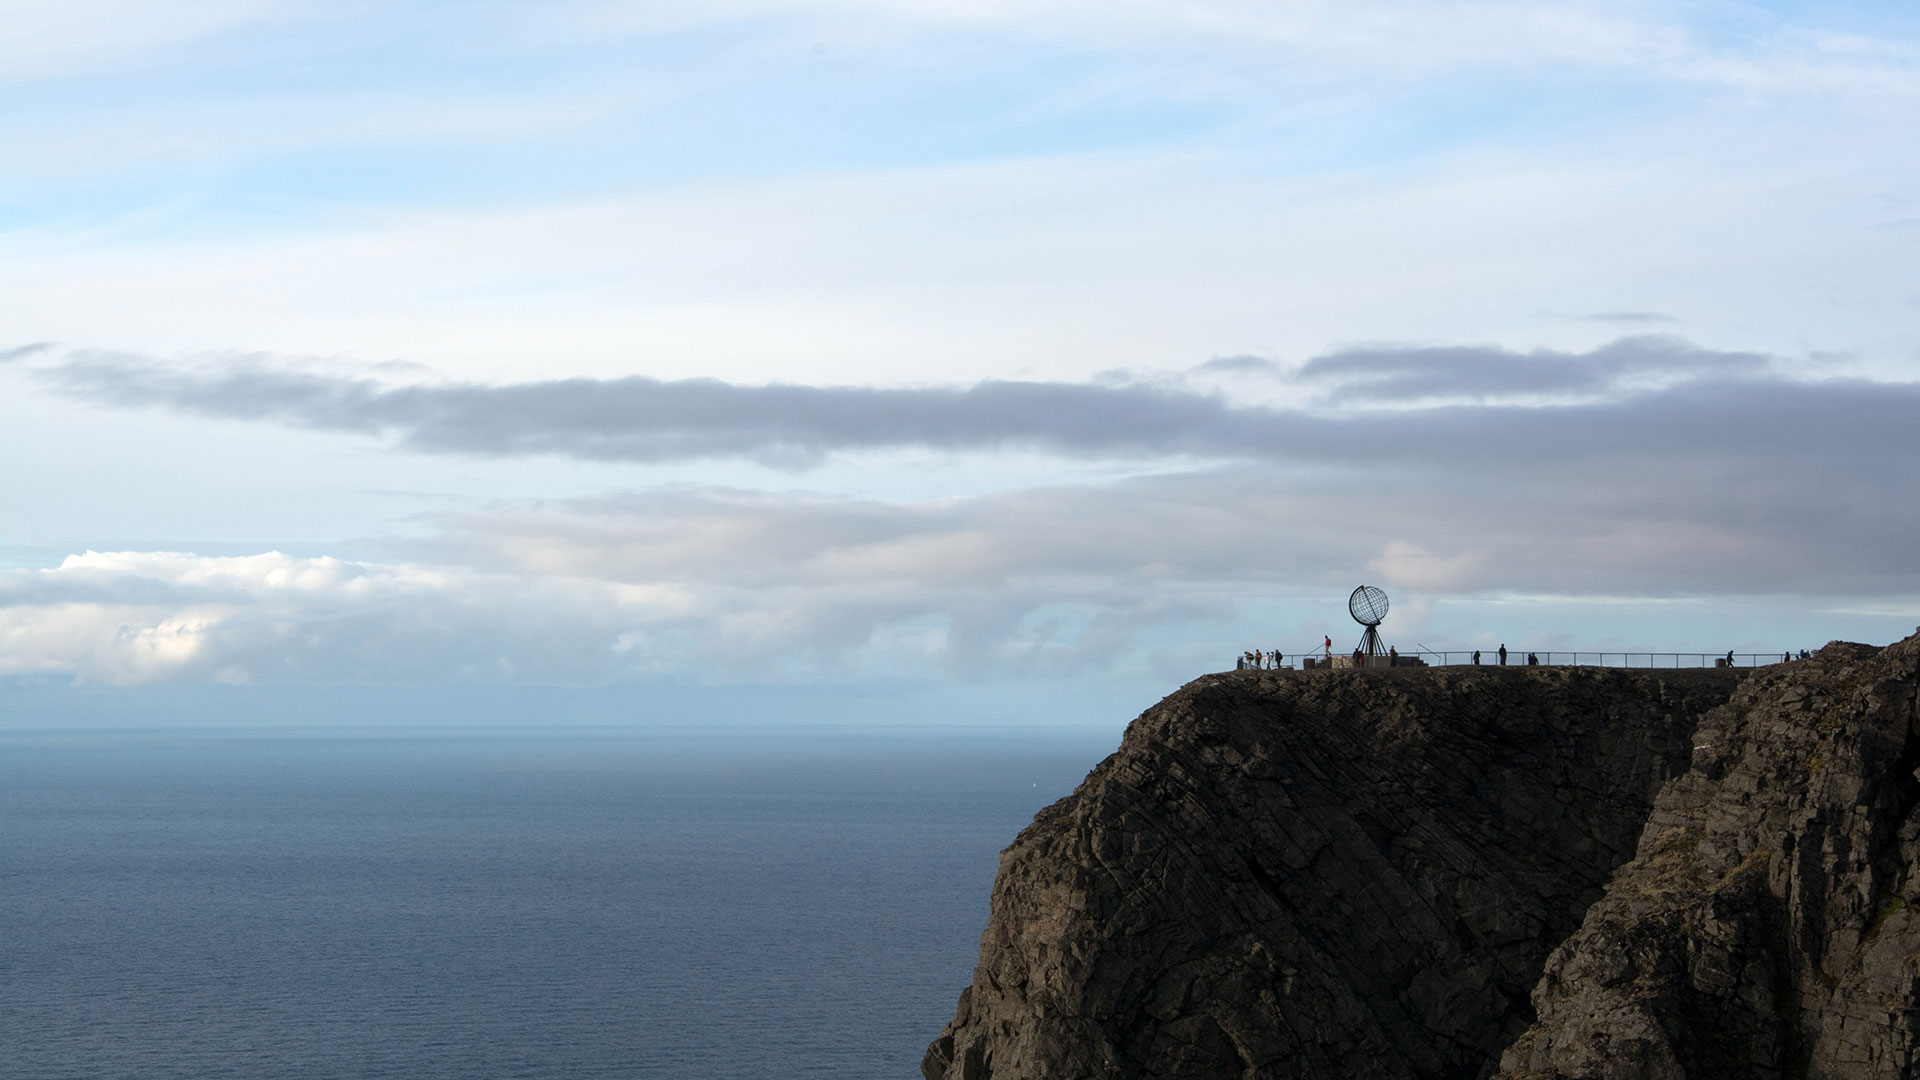 North Cape in Norway